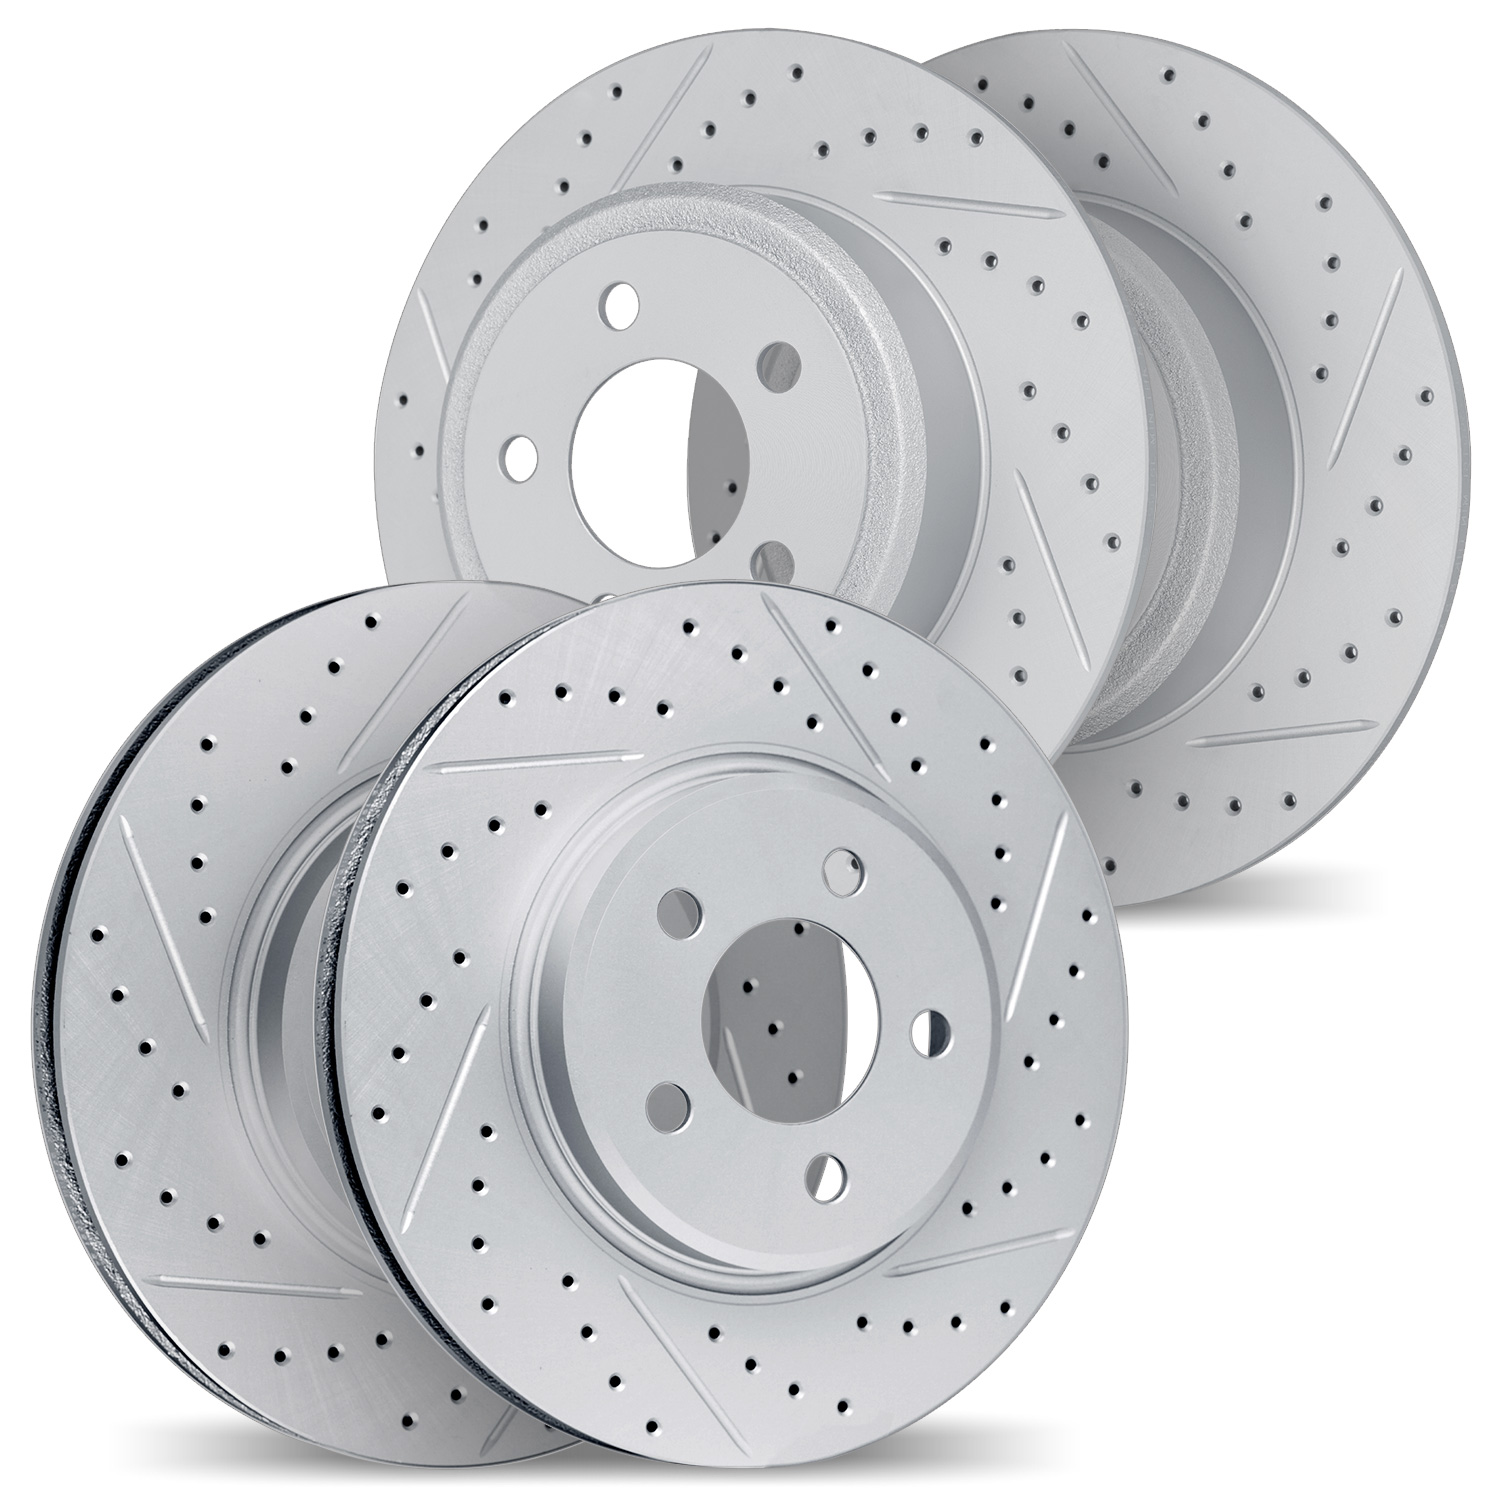 2004-52001 Geoperformance Drilled/Slotted Brake Rotors, 1997-2005 GM, Position: Front and Rear